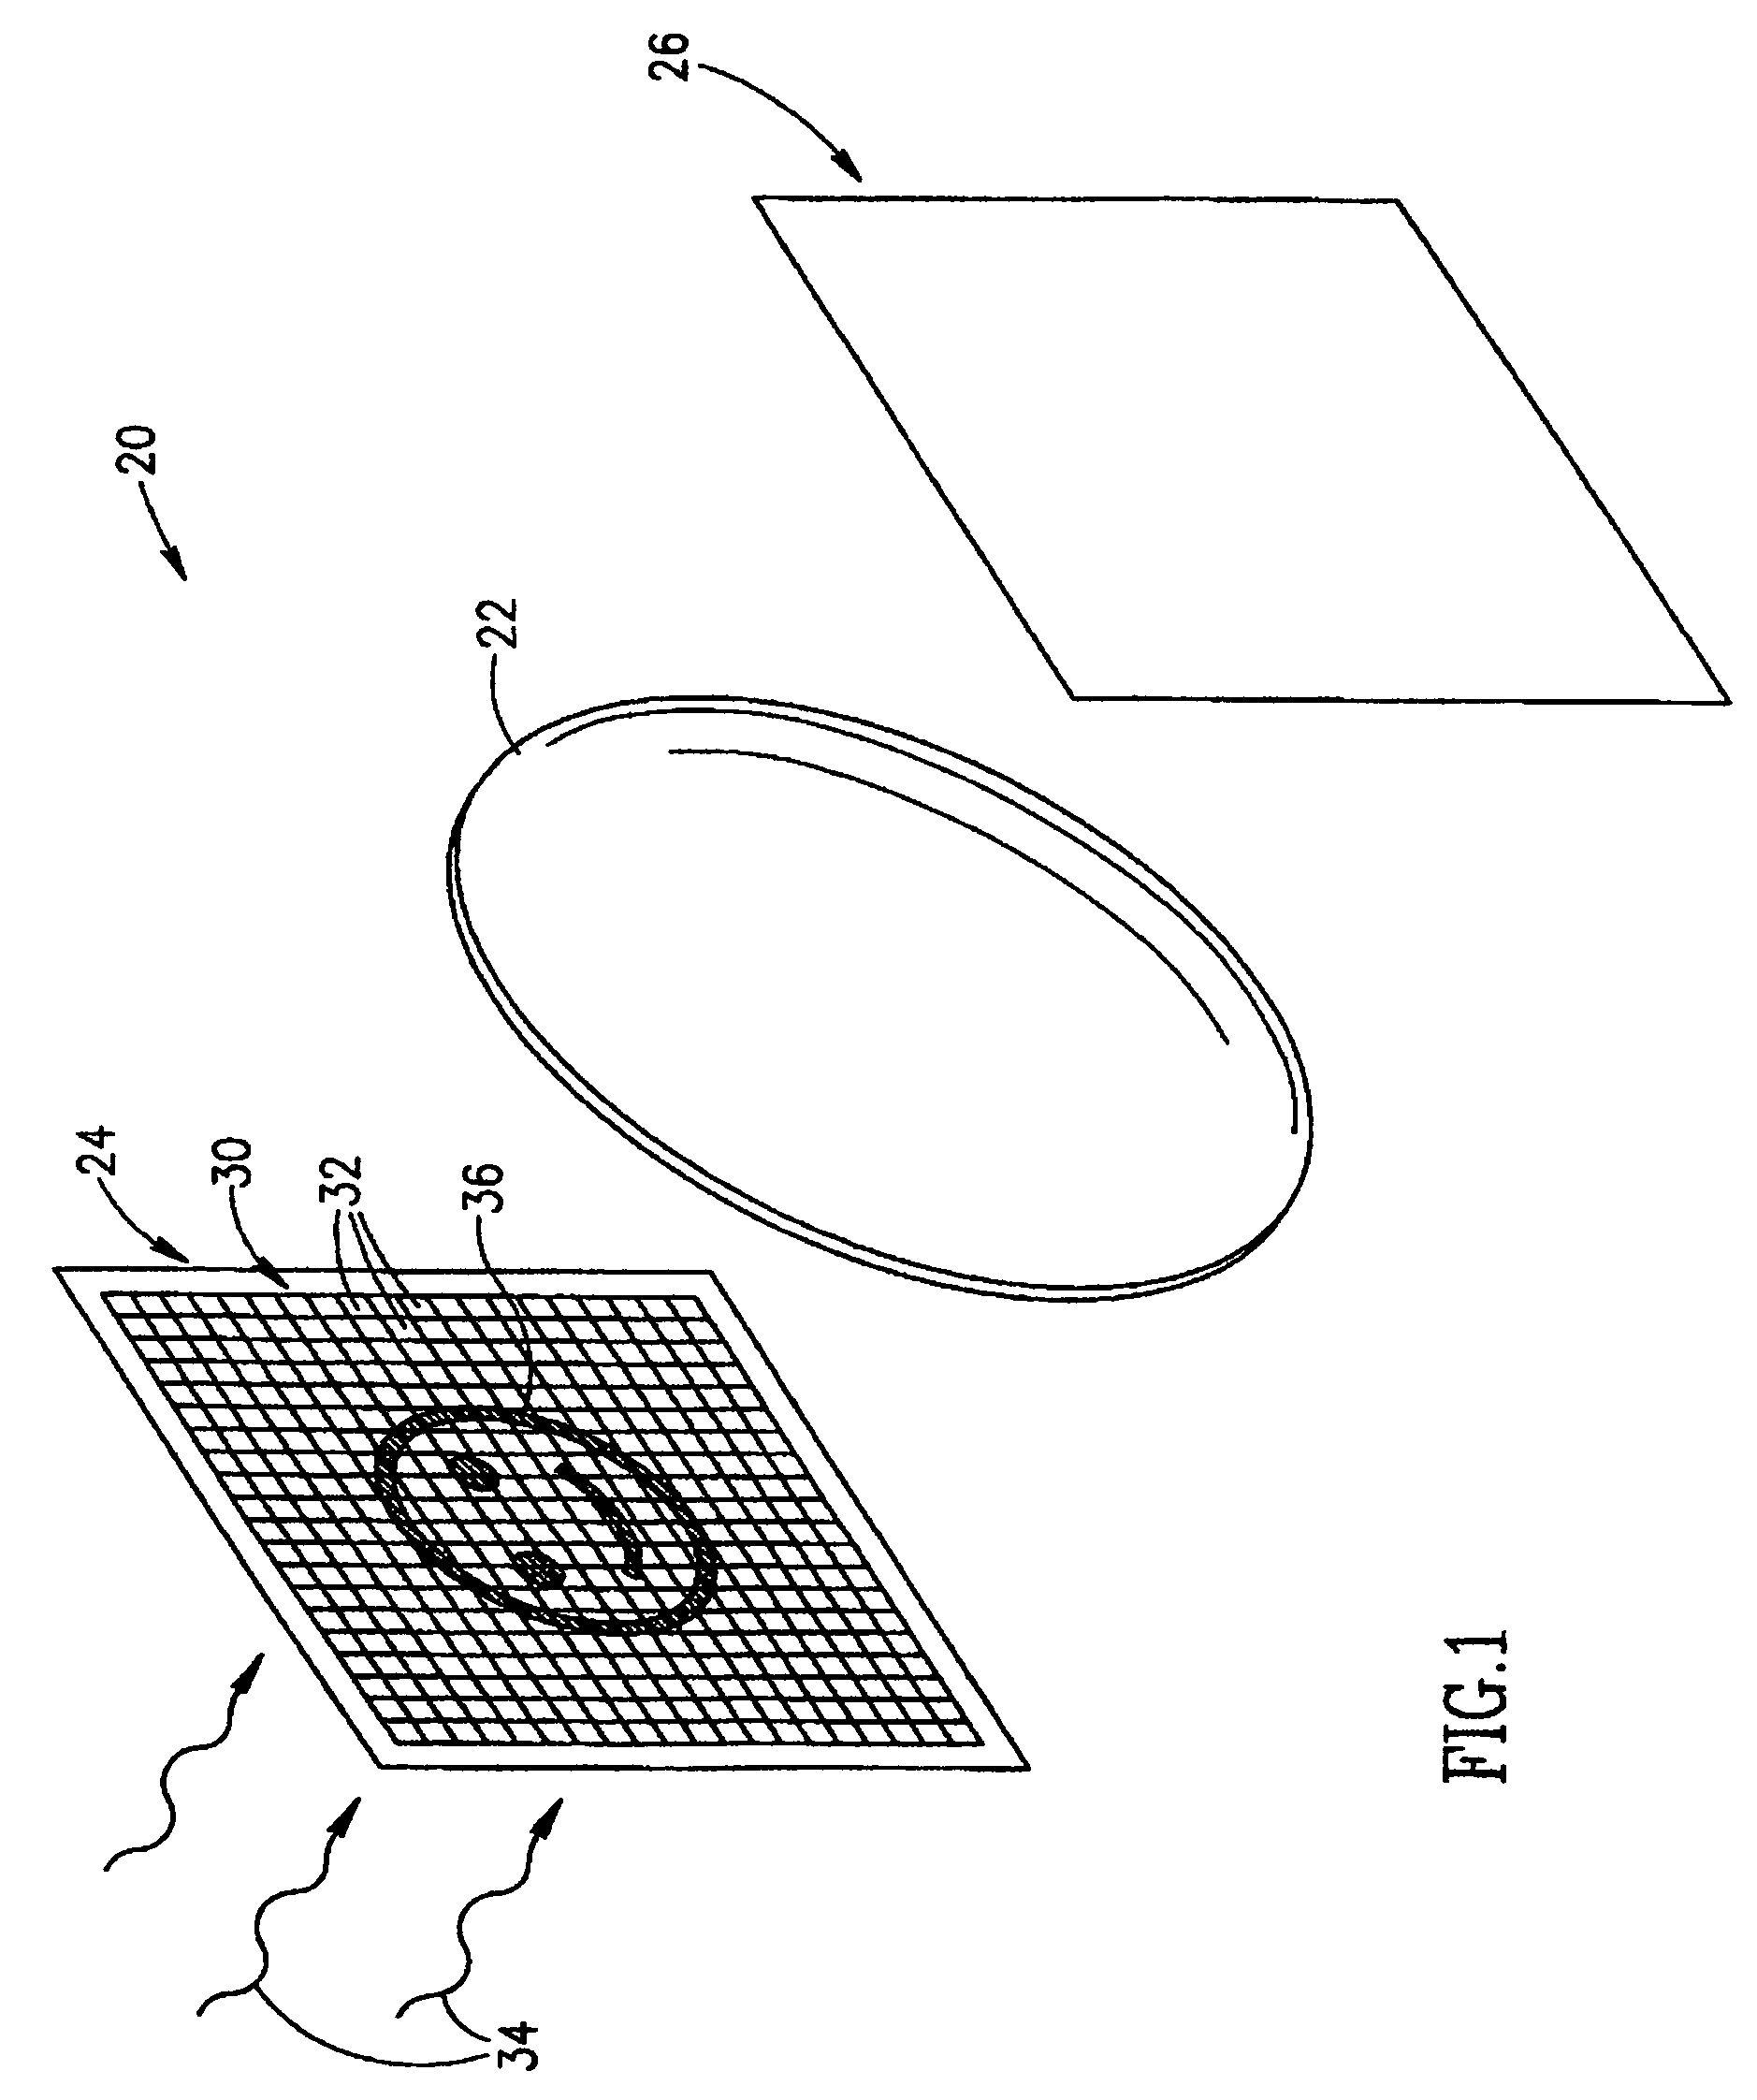 Phase extraction in optical processing